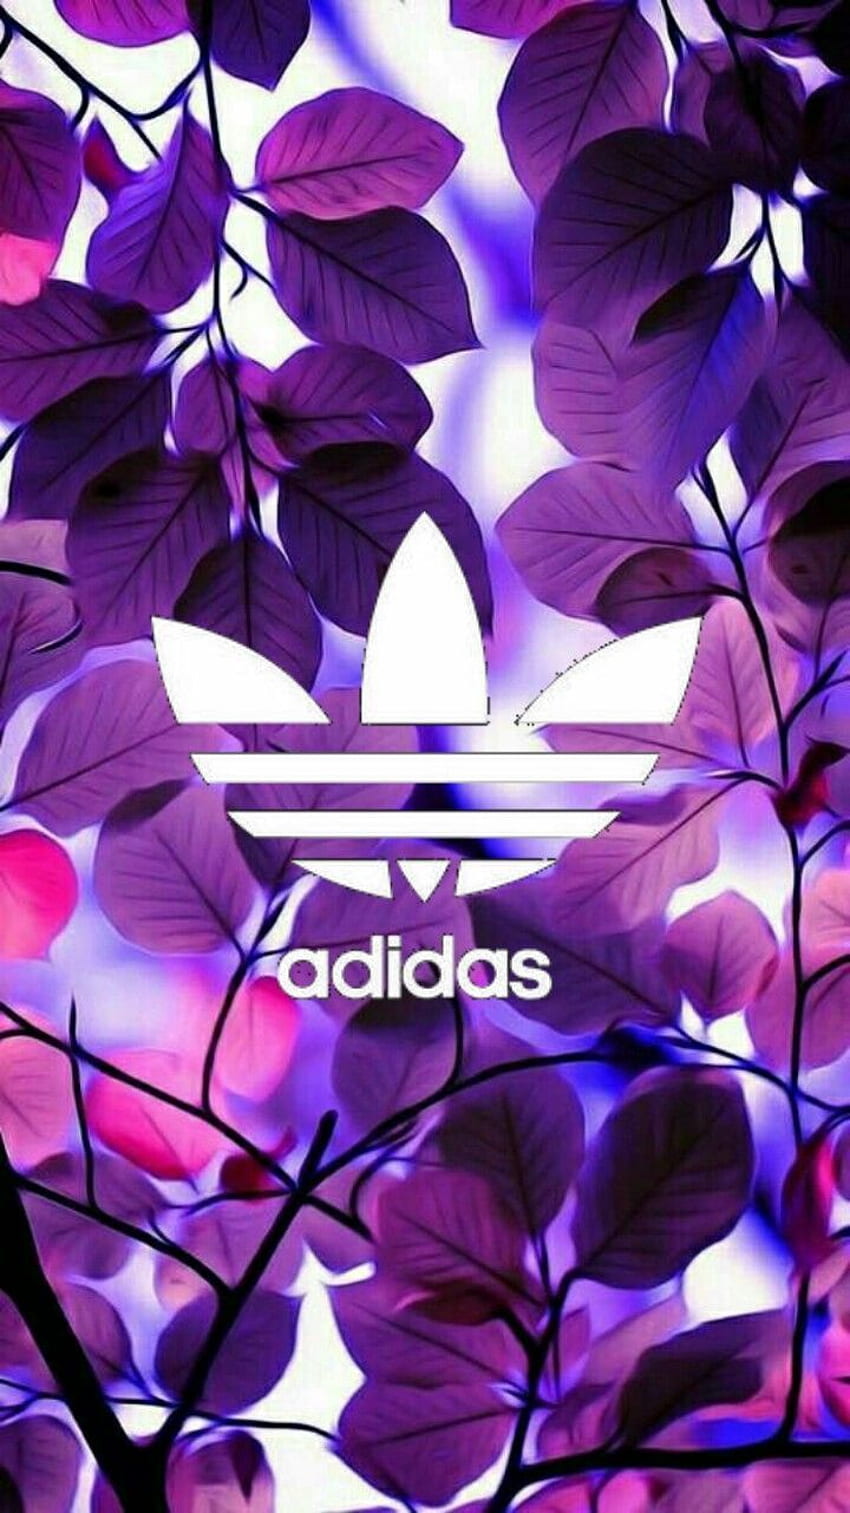 SPECIAL OFFER $19 on. Adidas, and Logos HD phone wallpaper